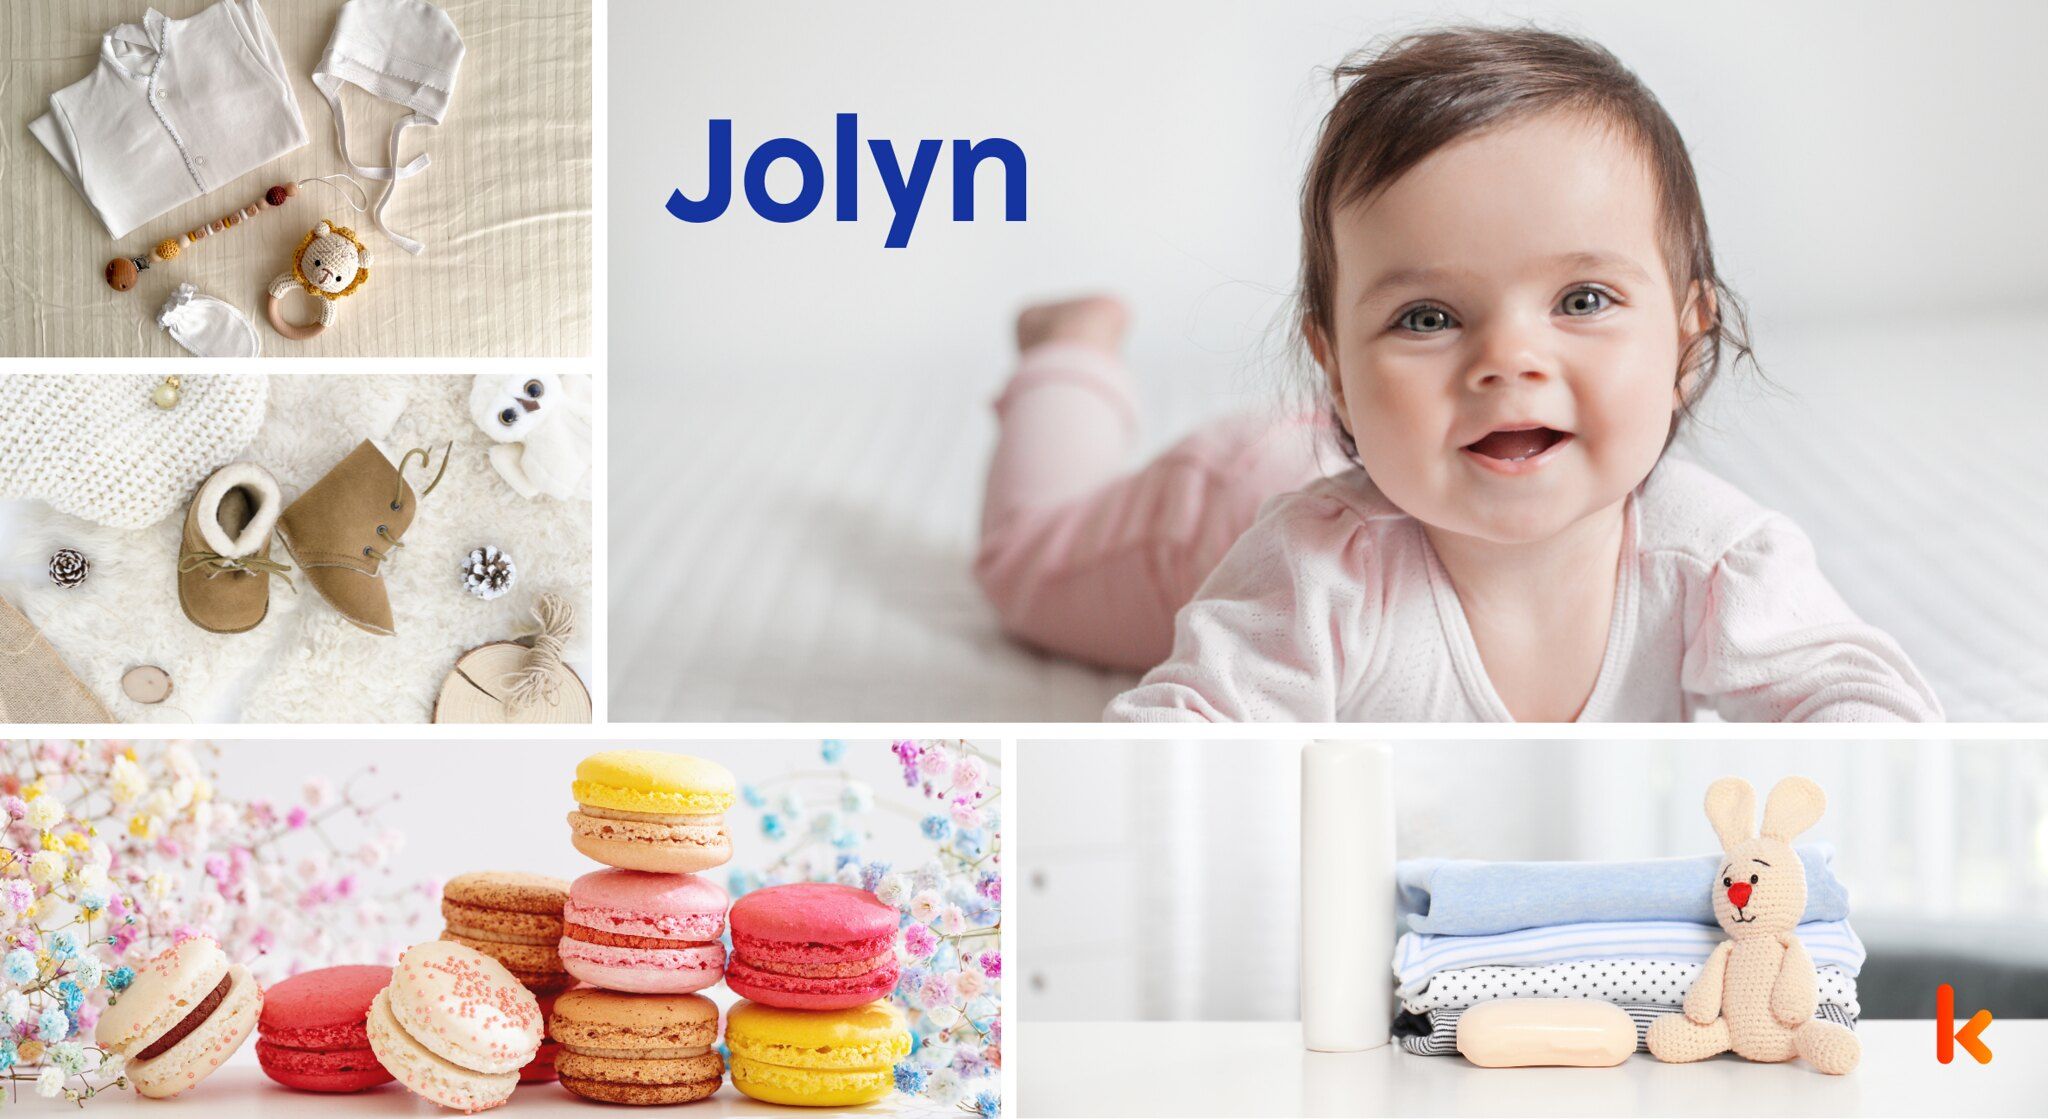 Meaning of the name Jolyn